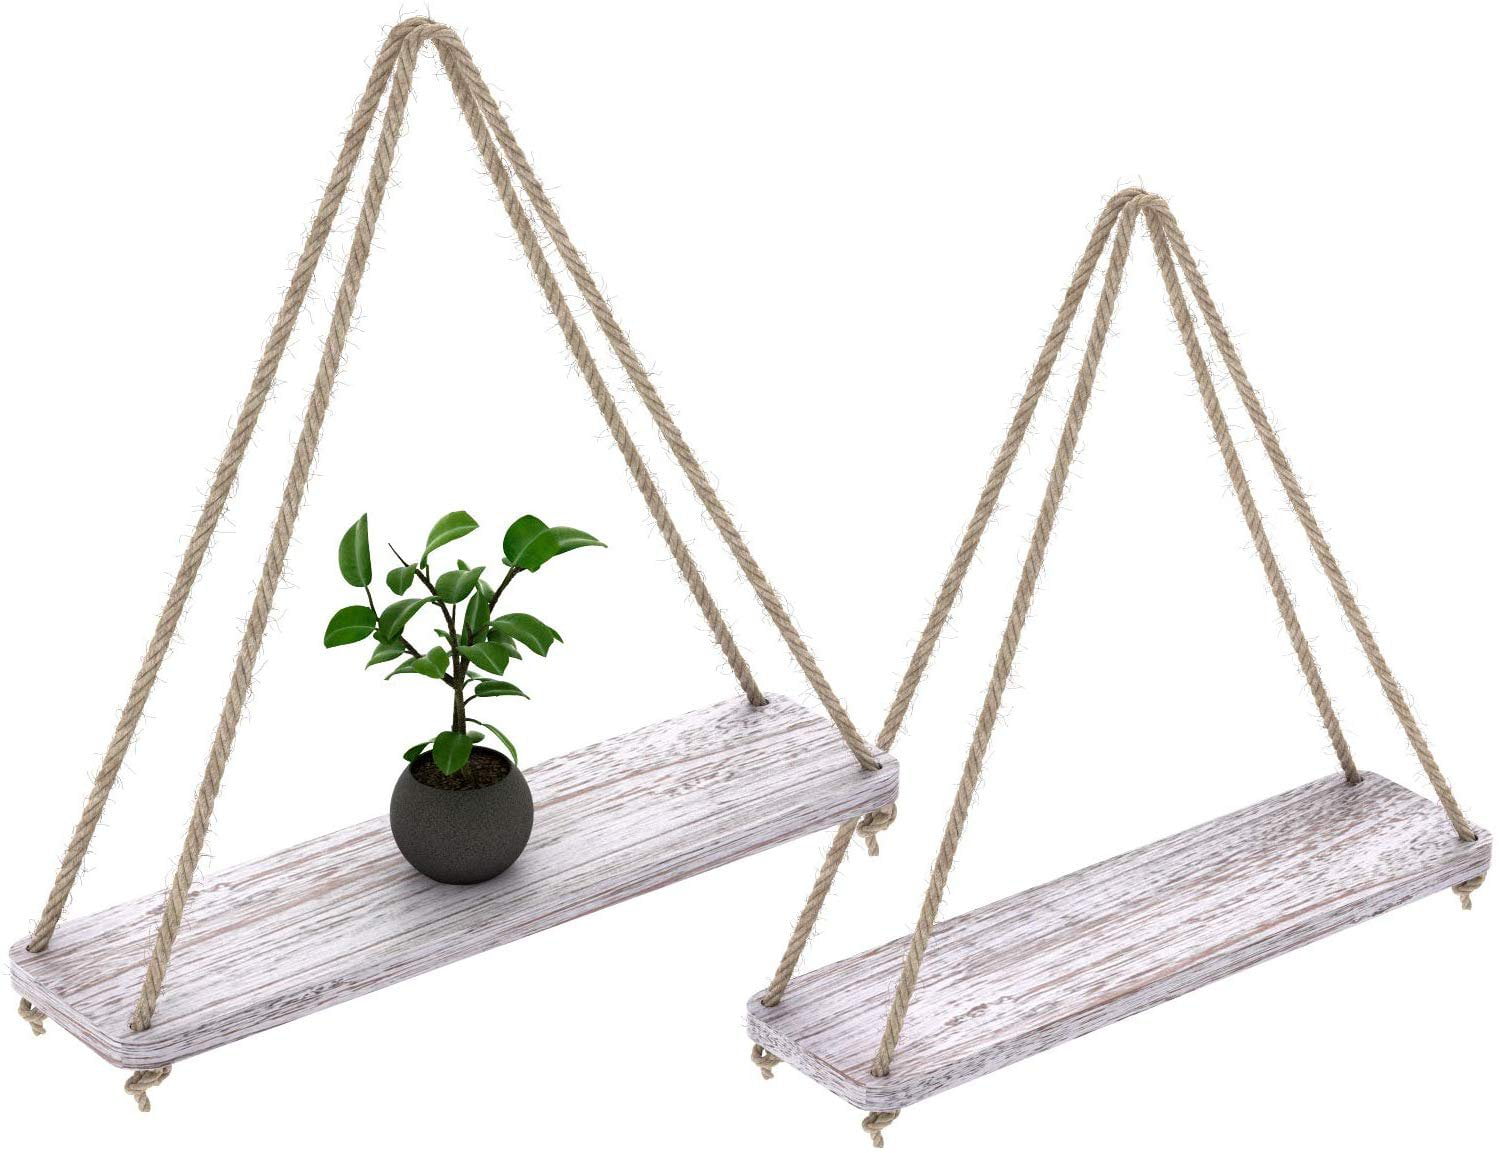 Rustic Set Of 2 Wooden Floating Shelves, Floating Shelves With Rope